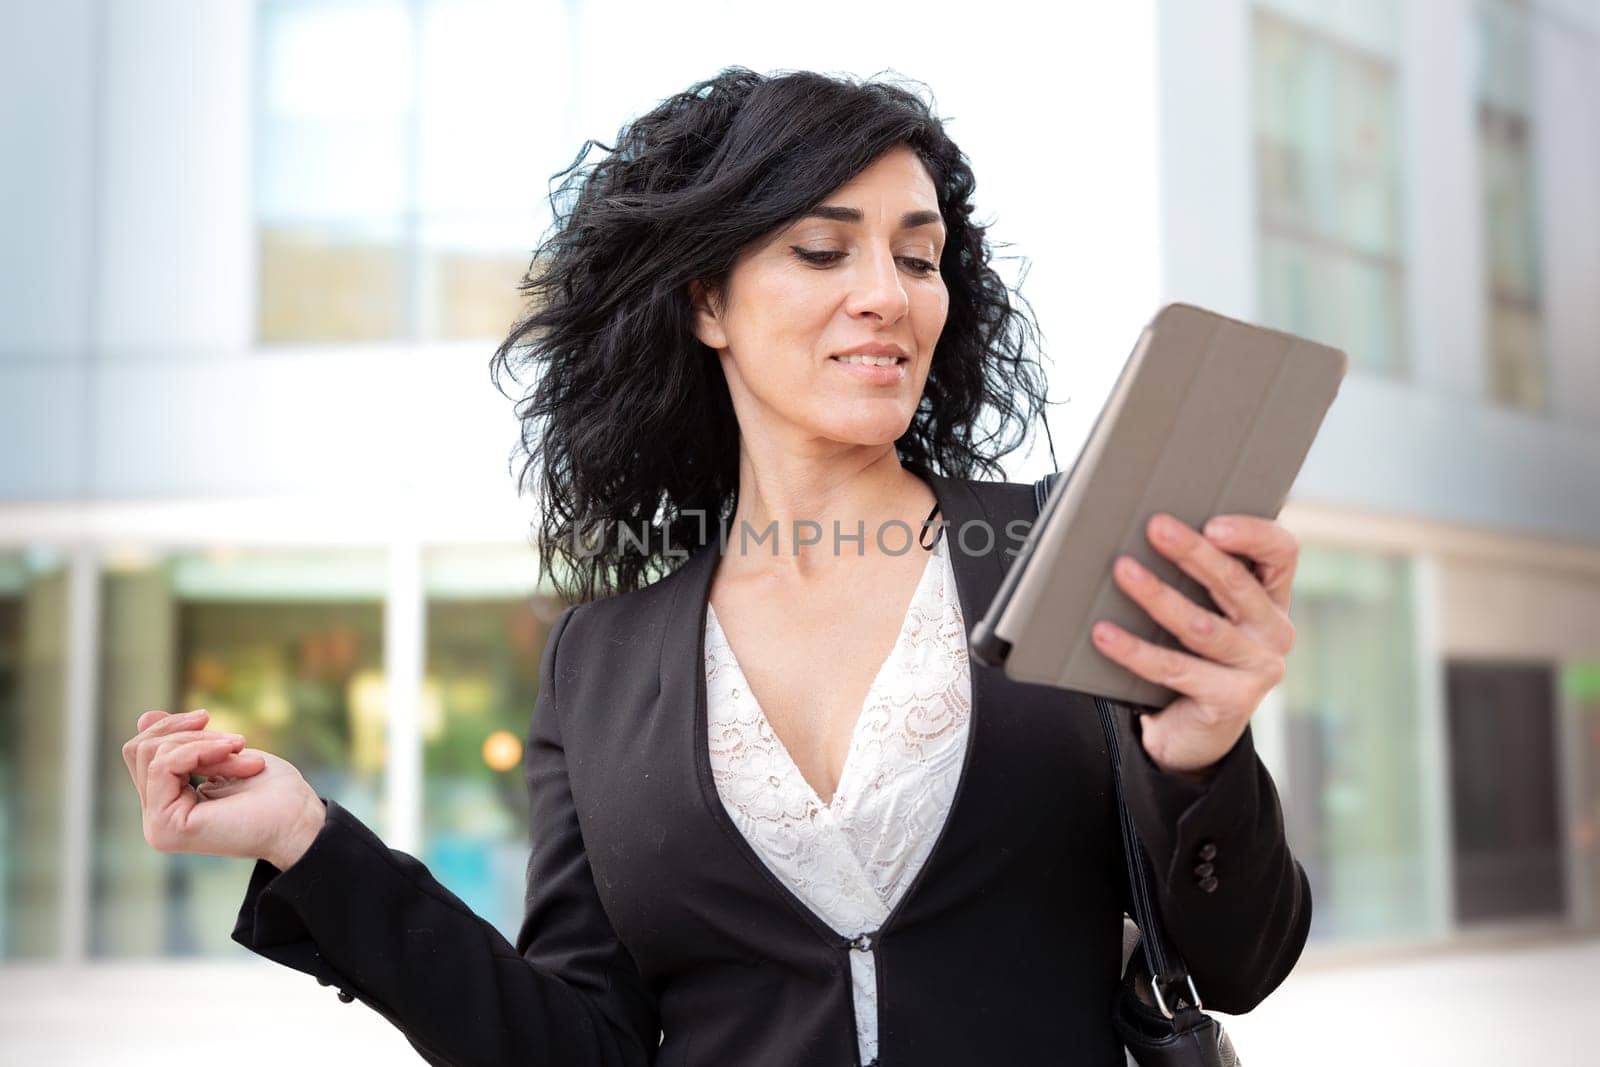 Smiling caucasian businesswoman with digital tablet outdoors. by mariaphoto3